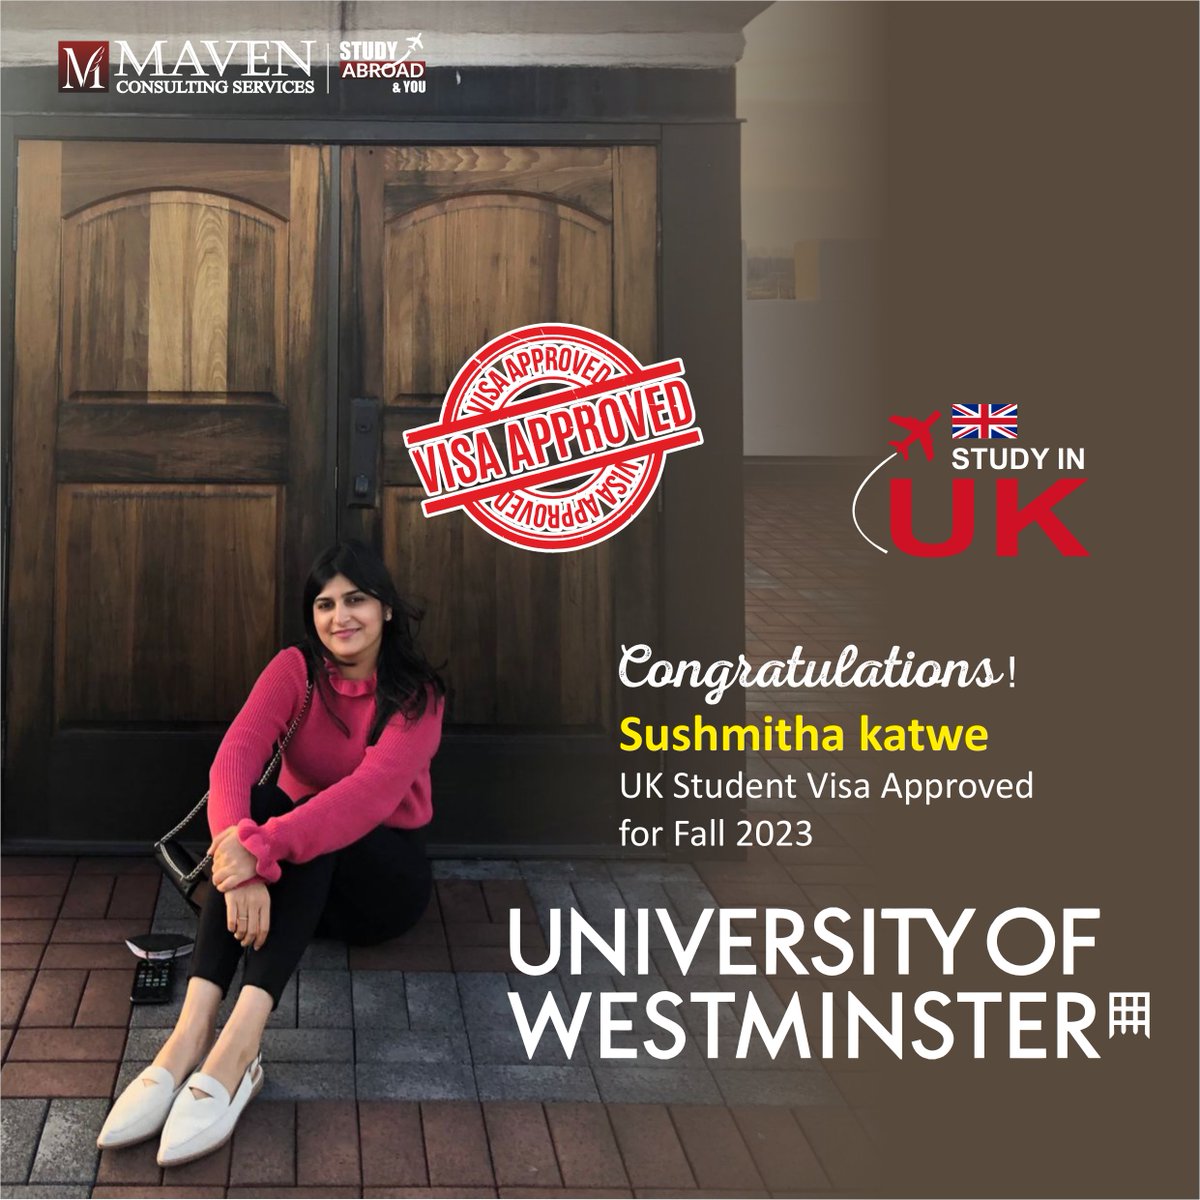 🎉🍁 Visa vibes! Huge congrats to Sushmitha Katwe for securing your UK student visa for Fall 2023! 🎓✈️ Get ready to rock those maple leaves and chase dreams! 🇬🇧💫 #StudyInUK #VisaApproved #AdventureAwaits